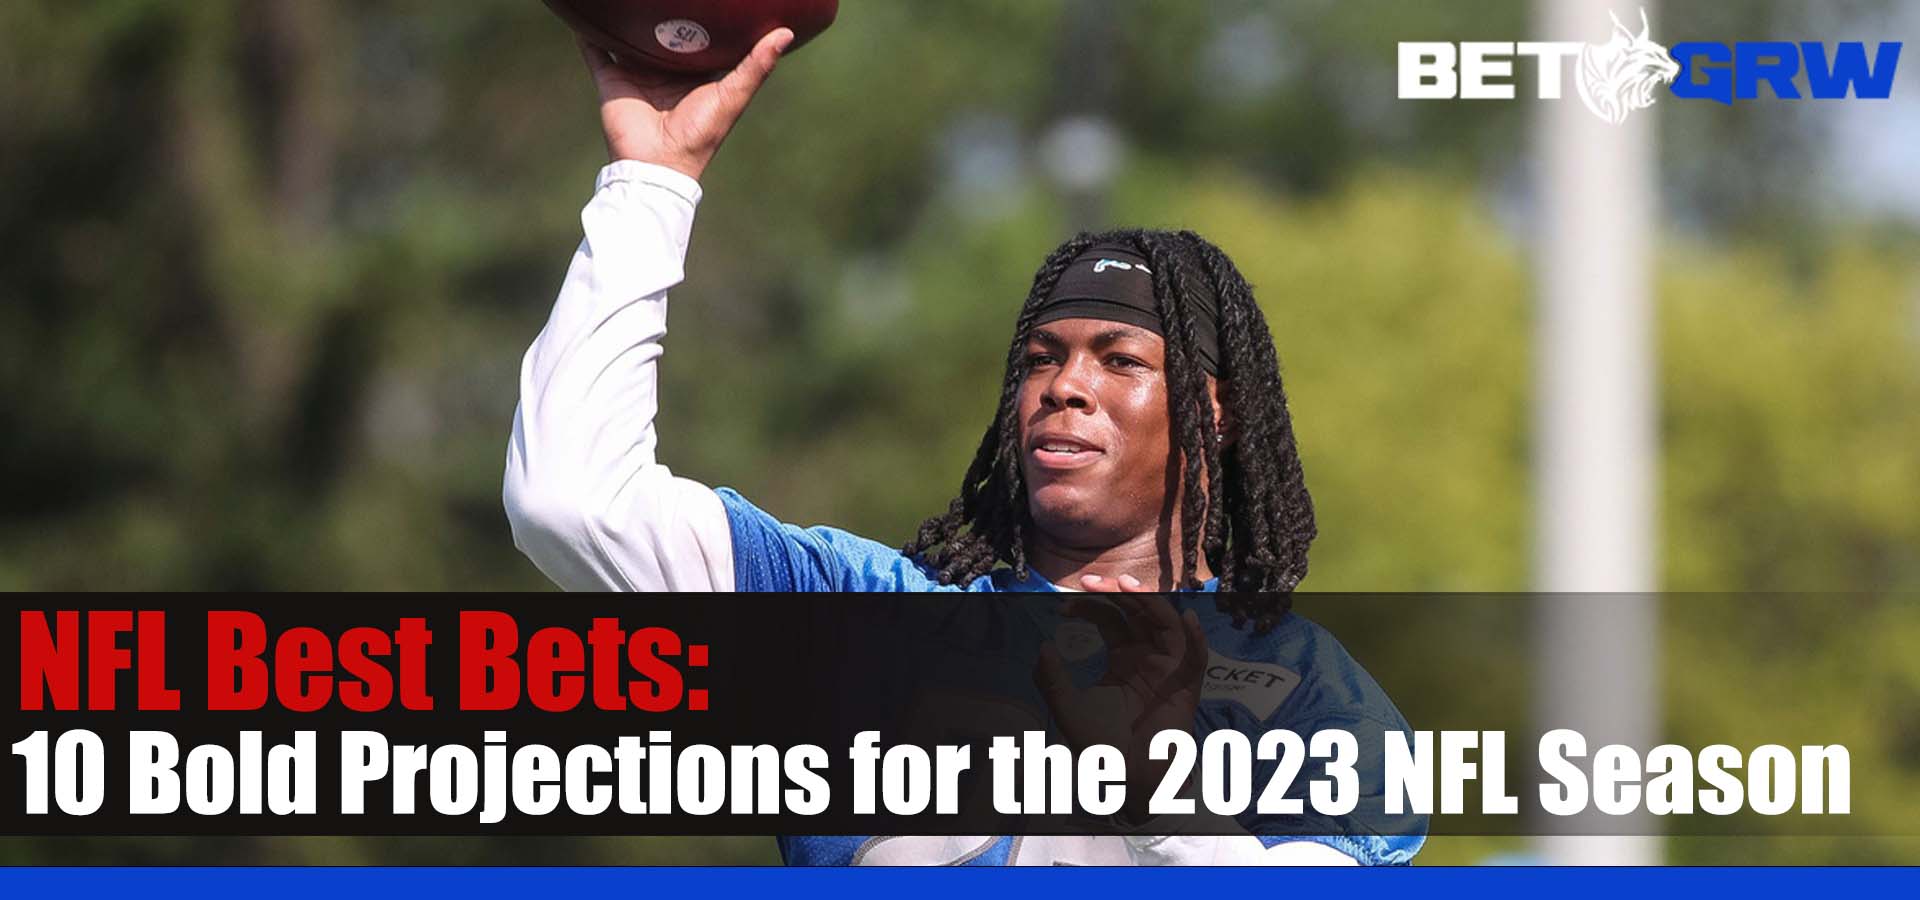 10 Bold Projections for the 2023 NFL Season BETGRW